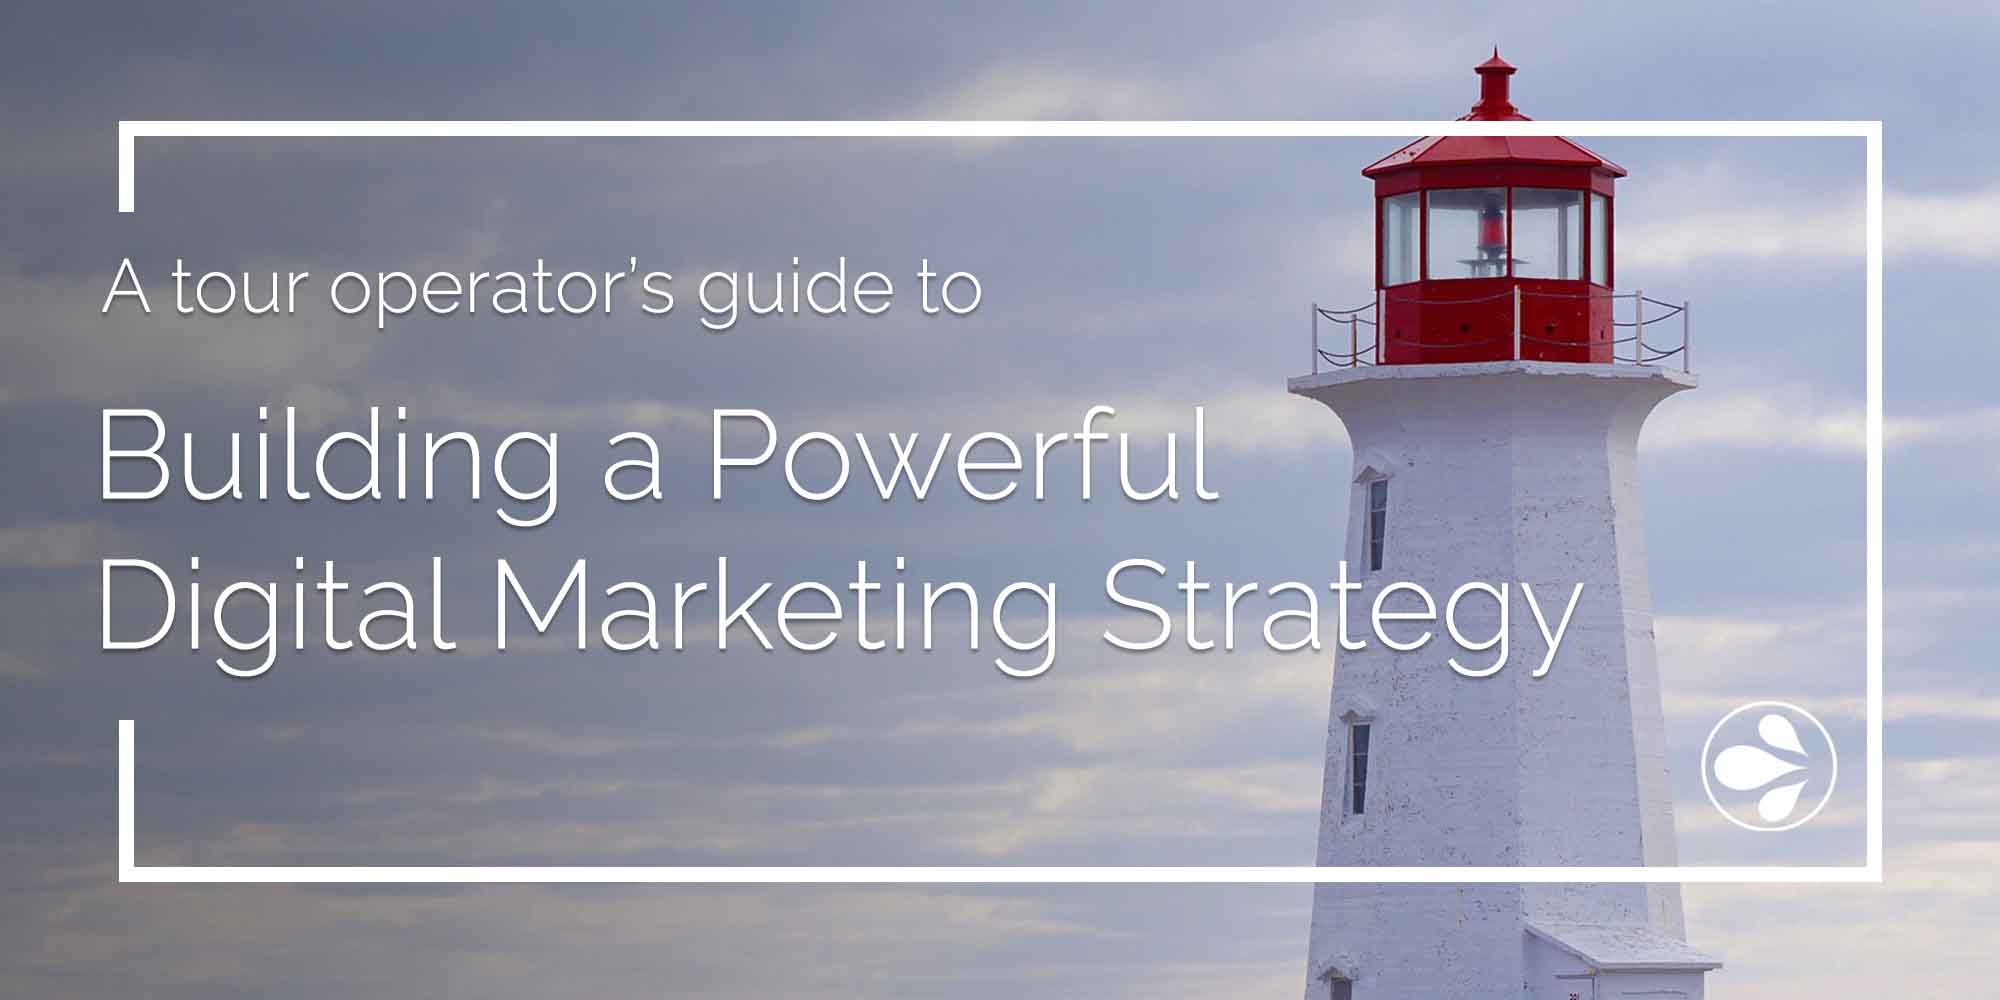 A Tour Operator’s Guide to Building a Powerful Digital Marketing Strategy